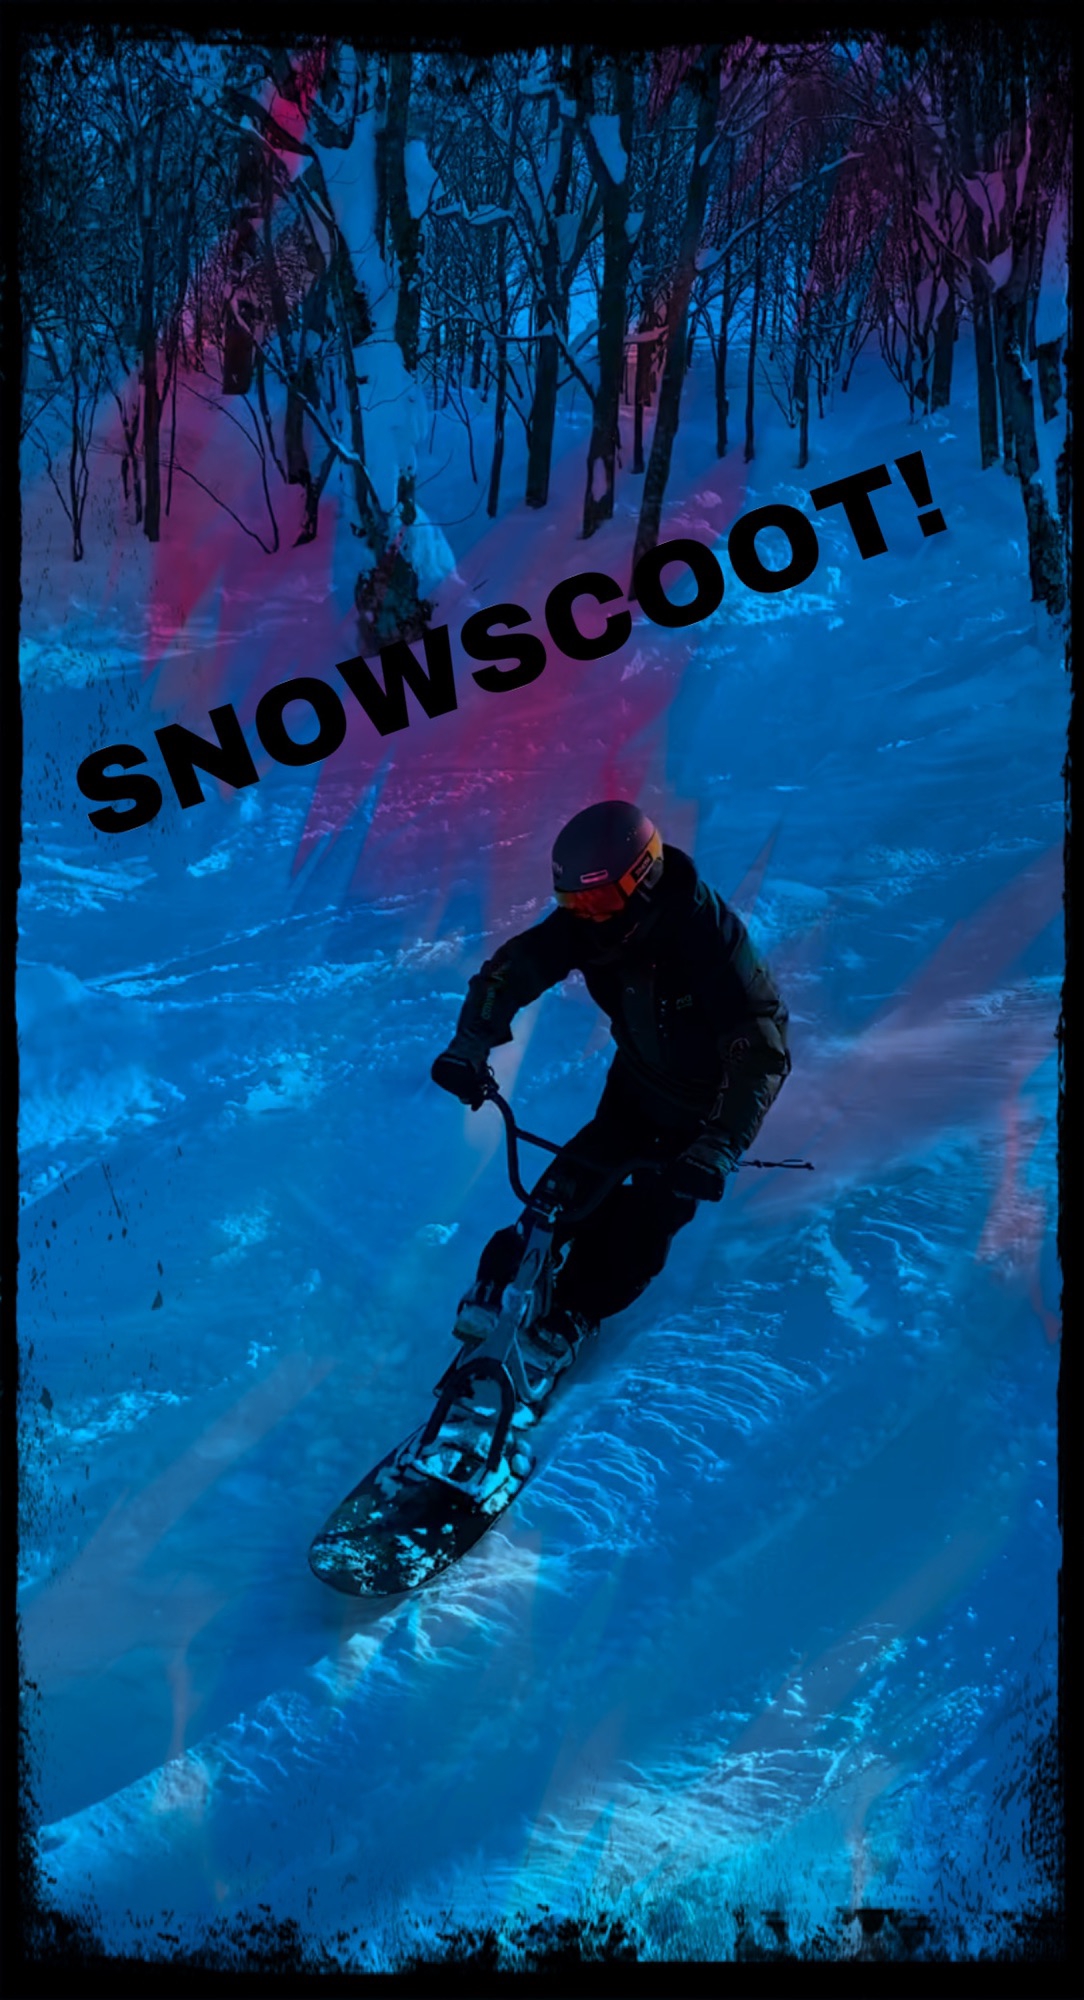 snow-moto&scoot | cycle space Halo